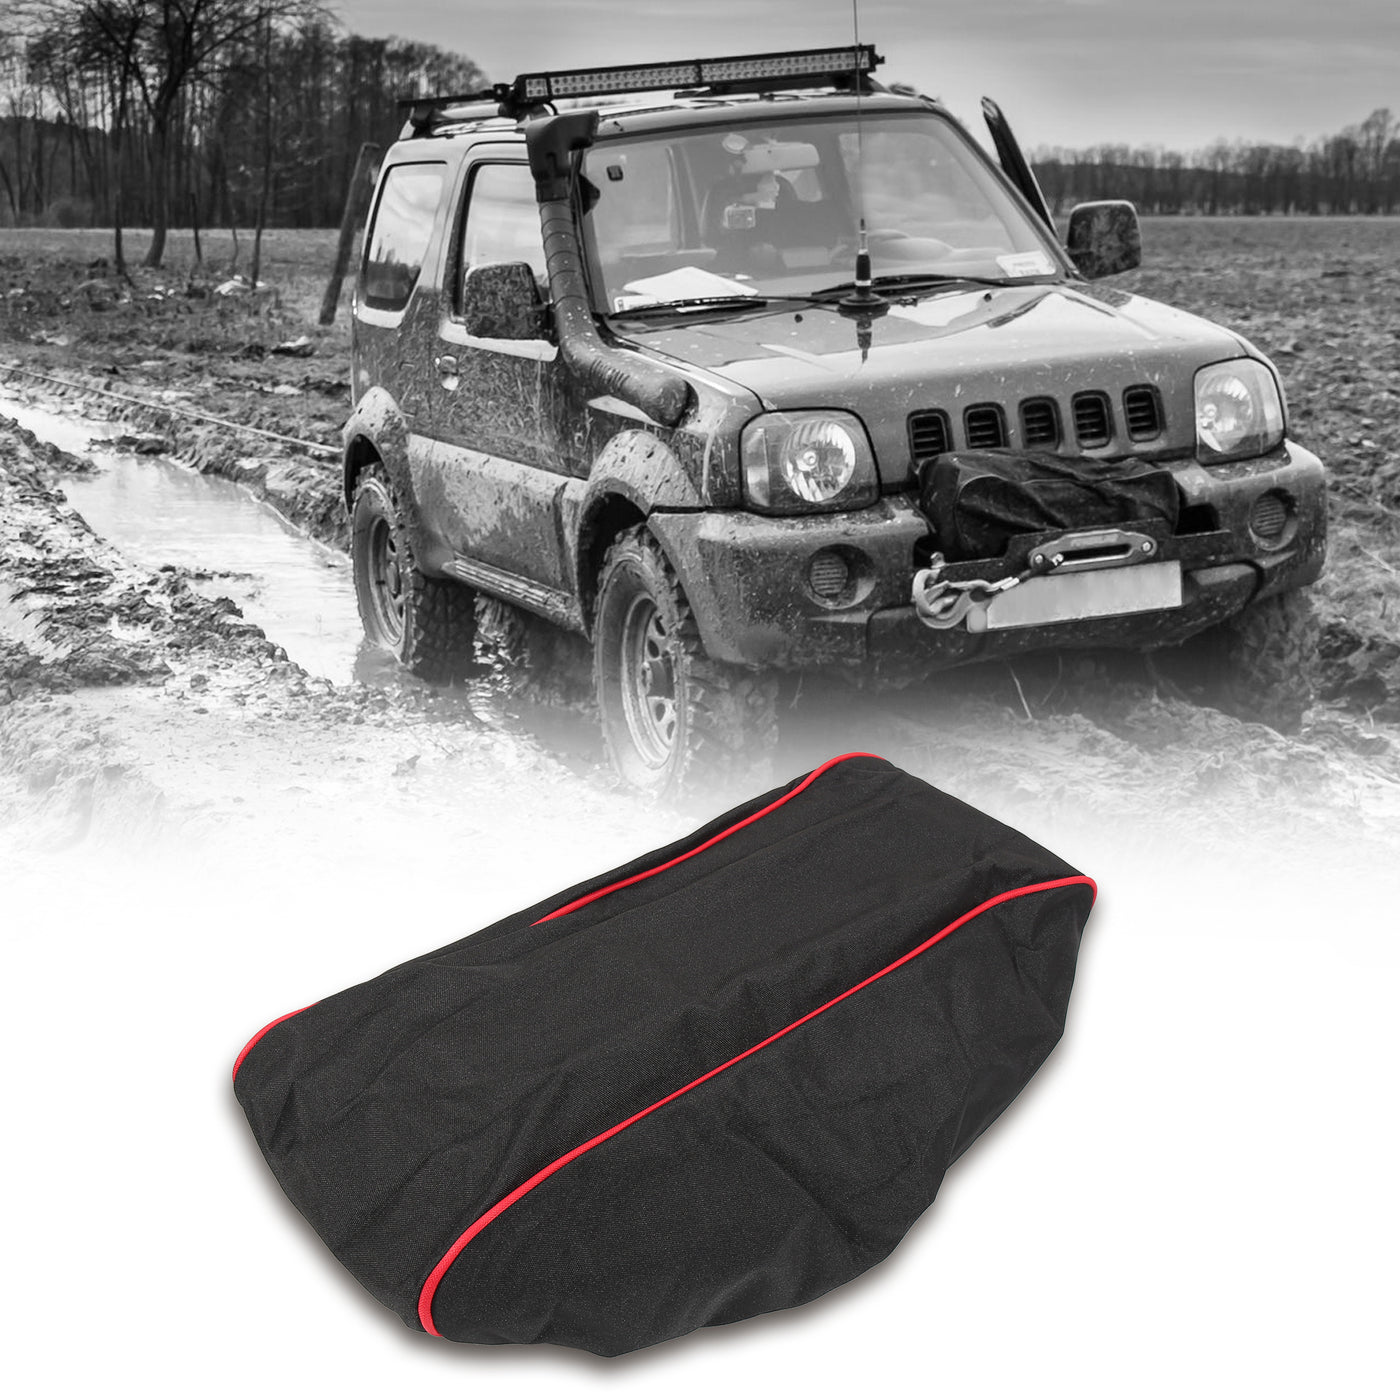 X AUTOHAUX Universal 600D Winch Cover Waterproof Dustproof Protection 19.69"x7.87"x8.66" Fit for 8500-17500 Lbs Electric Winches